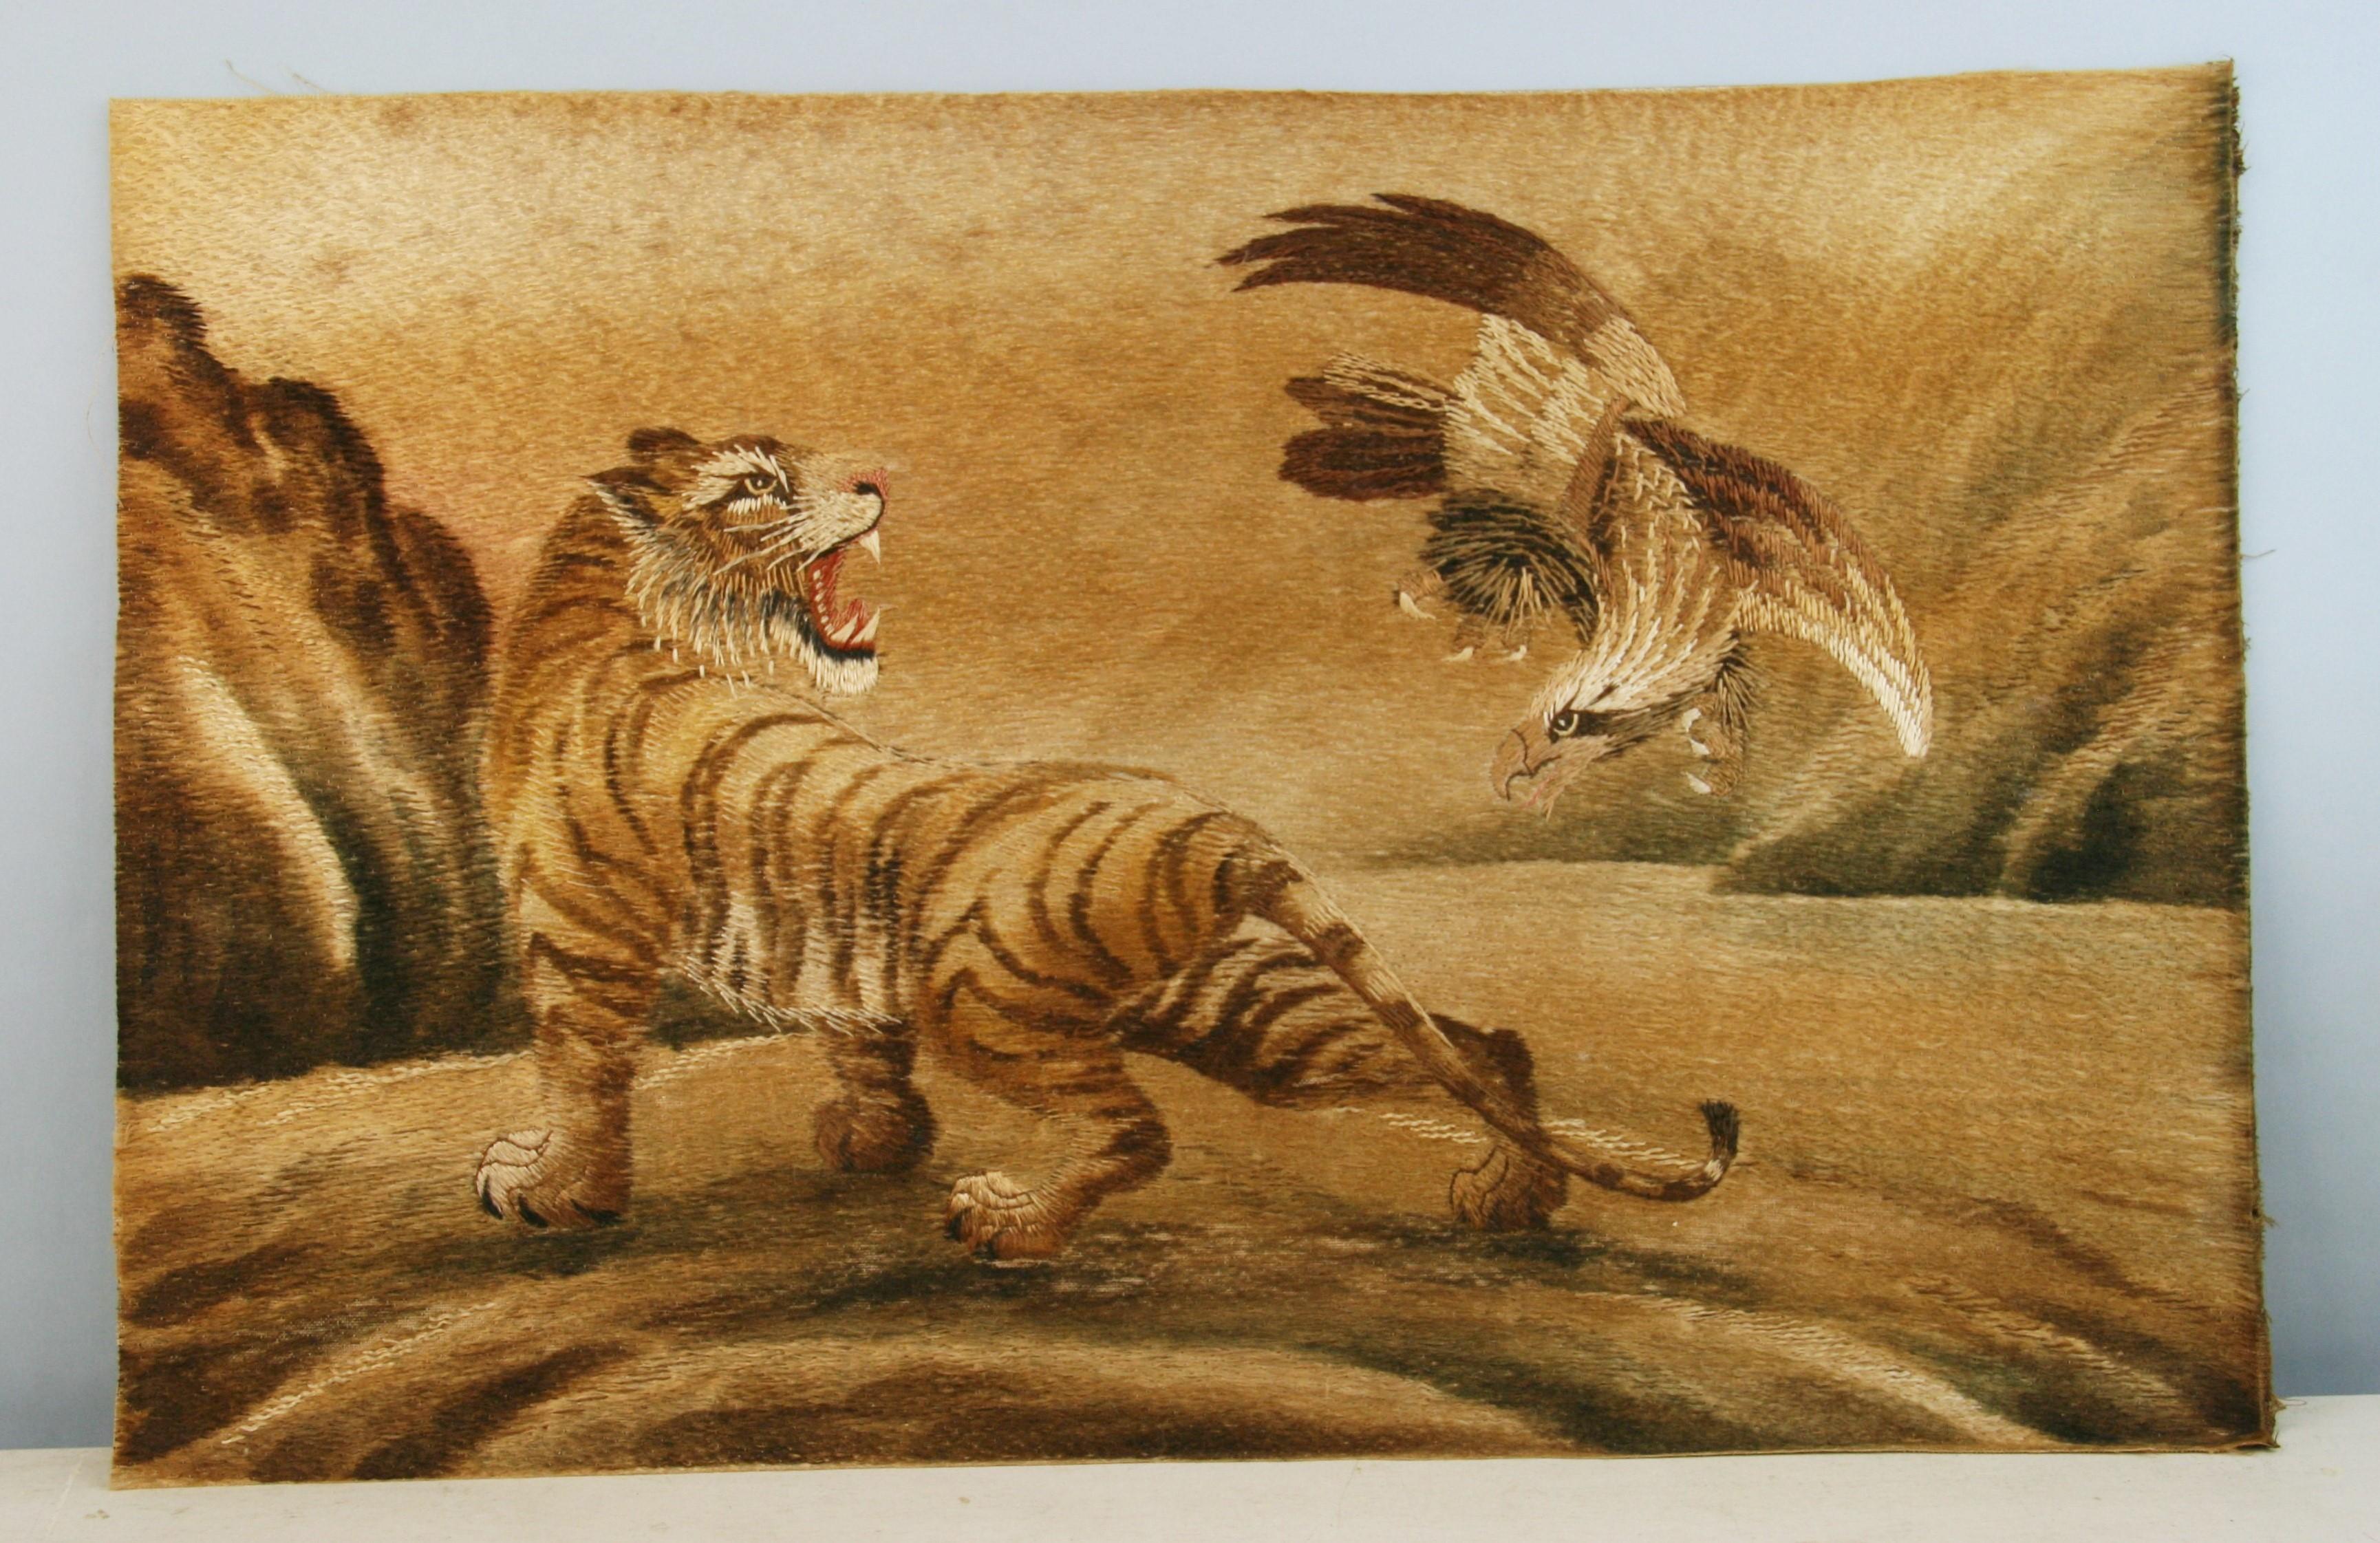 Japanese Hand embroidered wall hanging   of the Tiger and Eagle early 2oth century.
Woven in shades of brown,gold,yellow and red silk and cotton with a tiger and an eagle.
Beautiful full color tones across the piece.
Applied to a board at latter